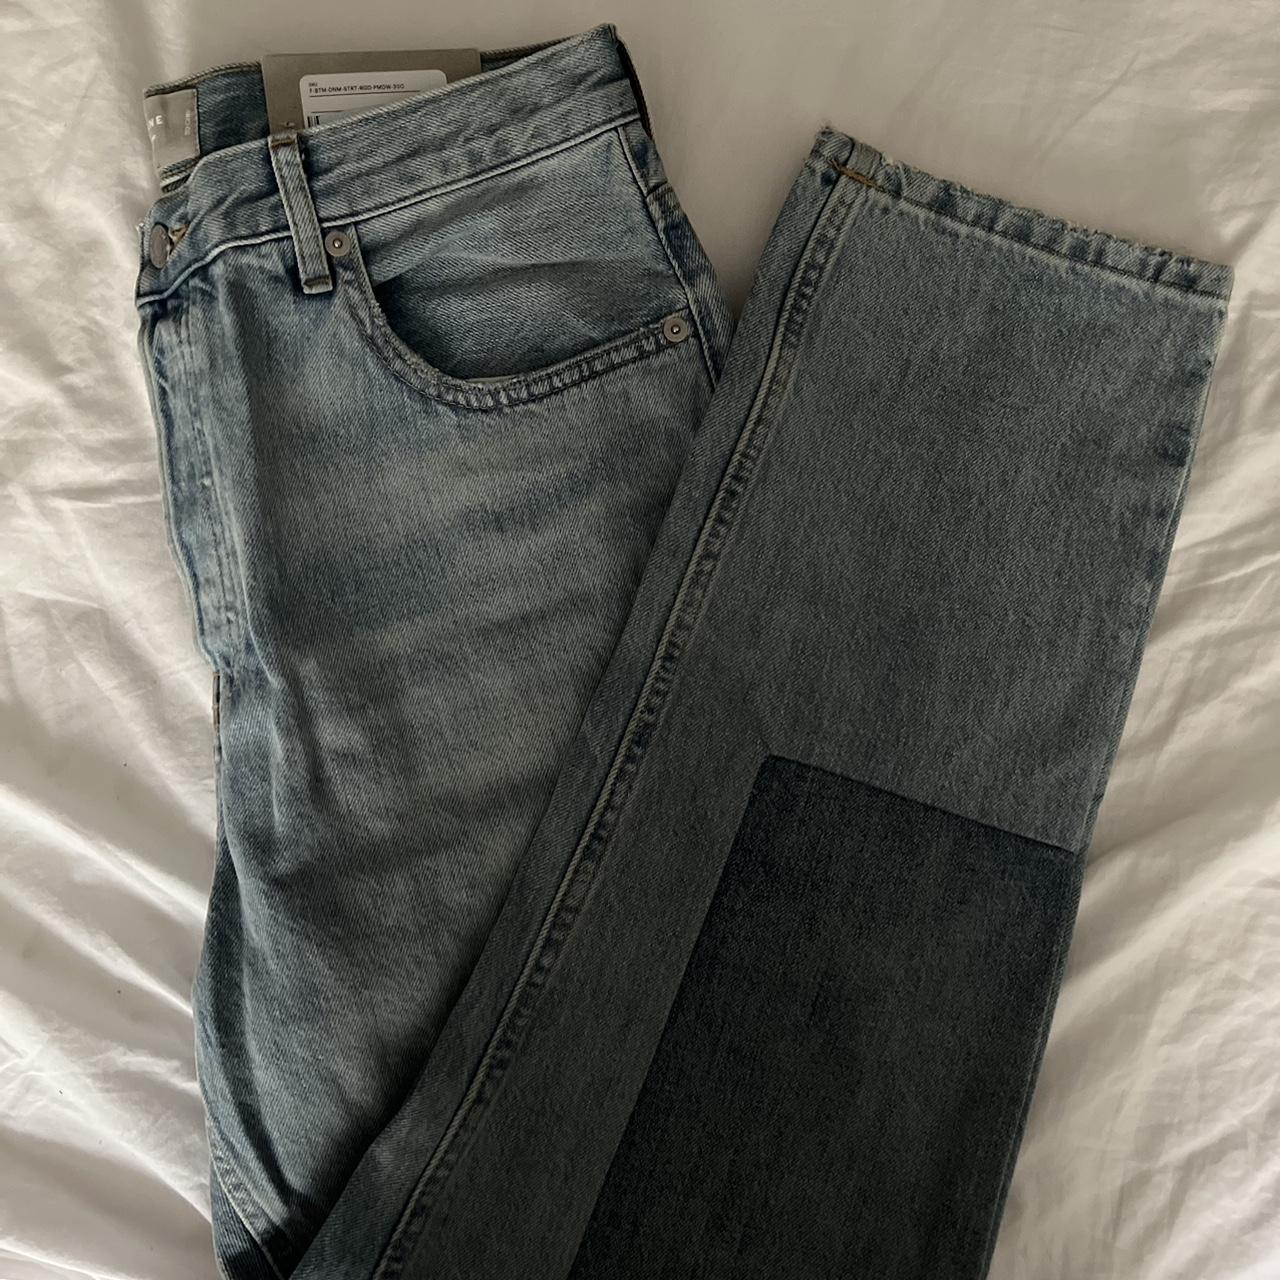 Everlane The ’90s Cheeky Jean in patched blue... - Depop